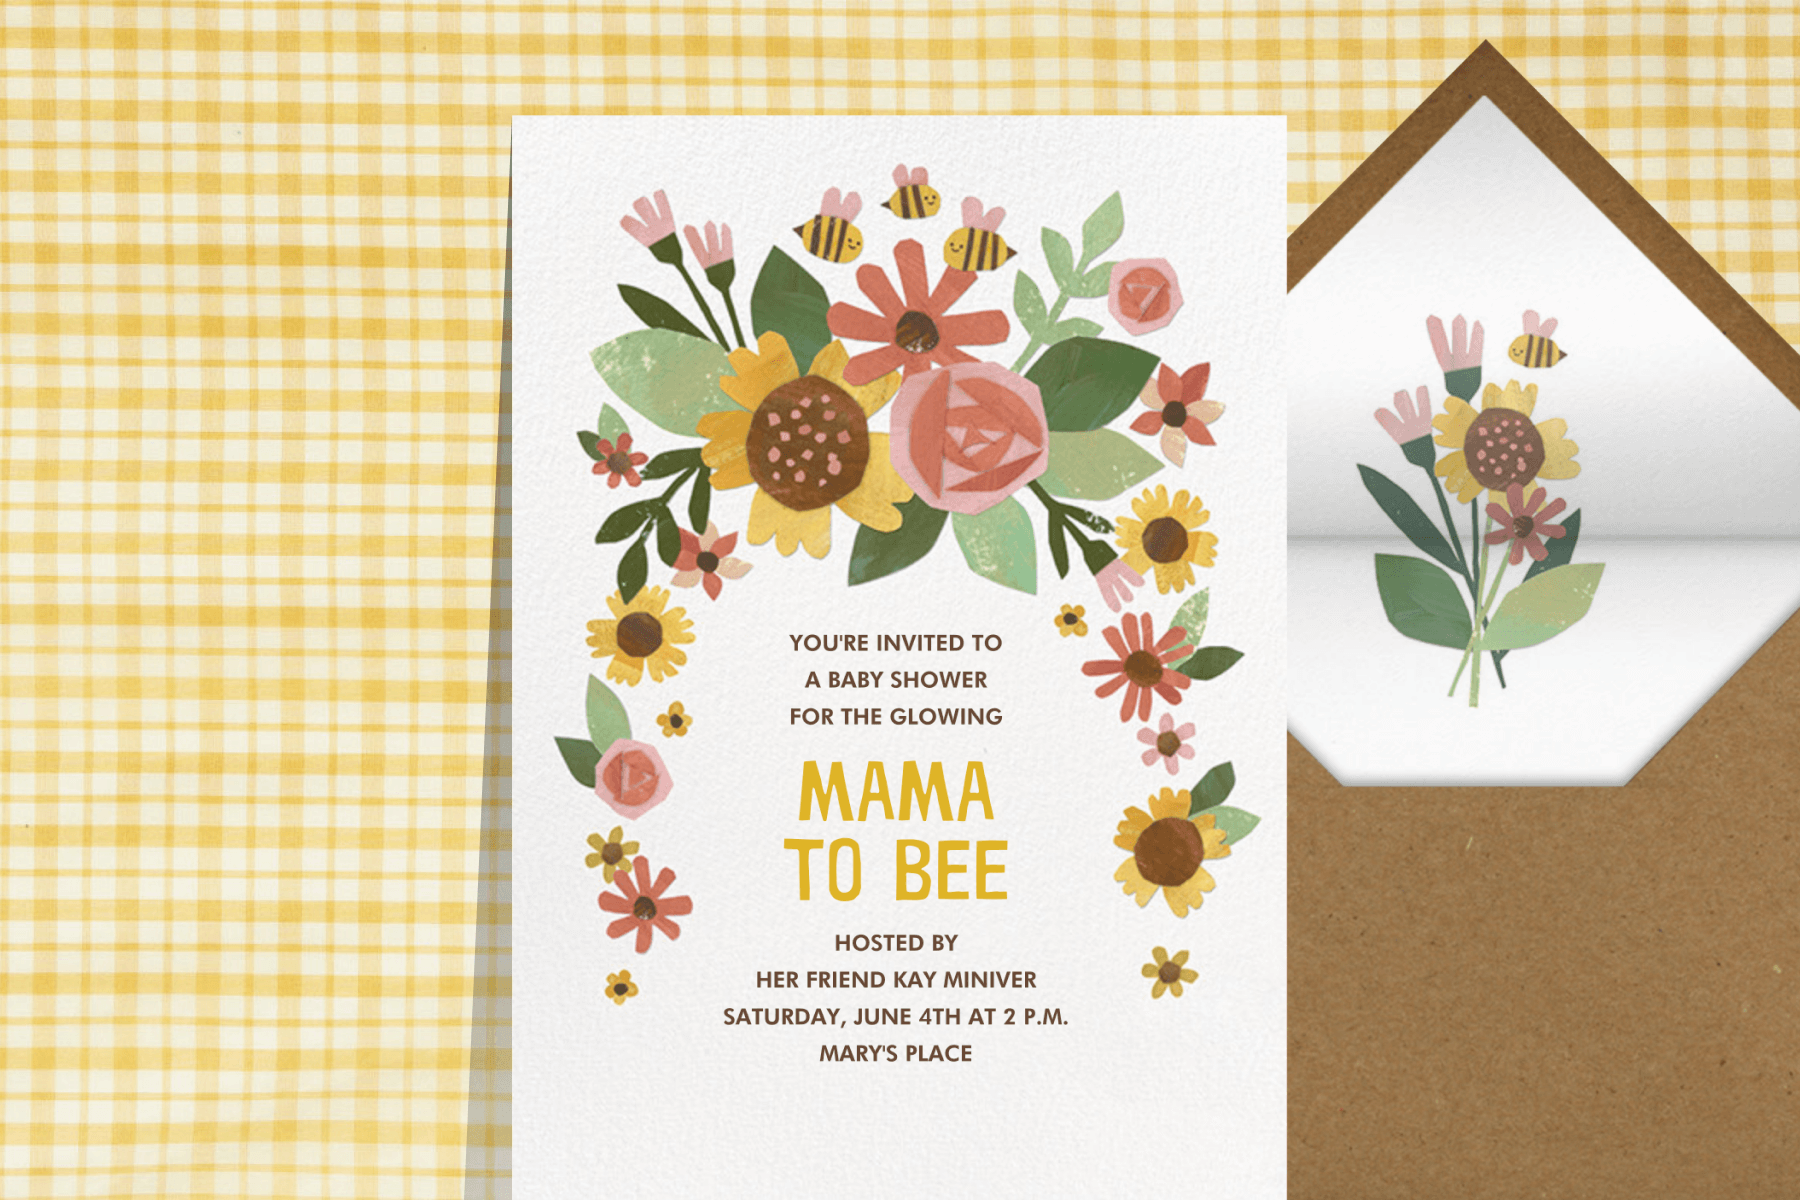 A baby shower invitation with paper cutout florals and bumblebees